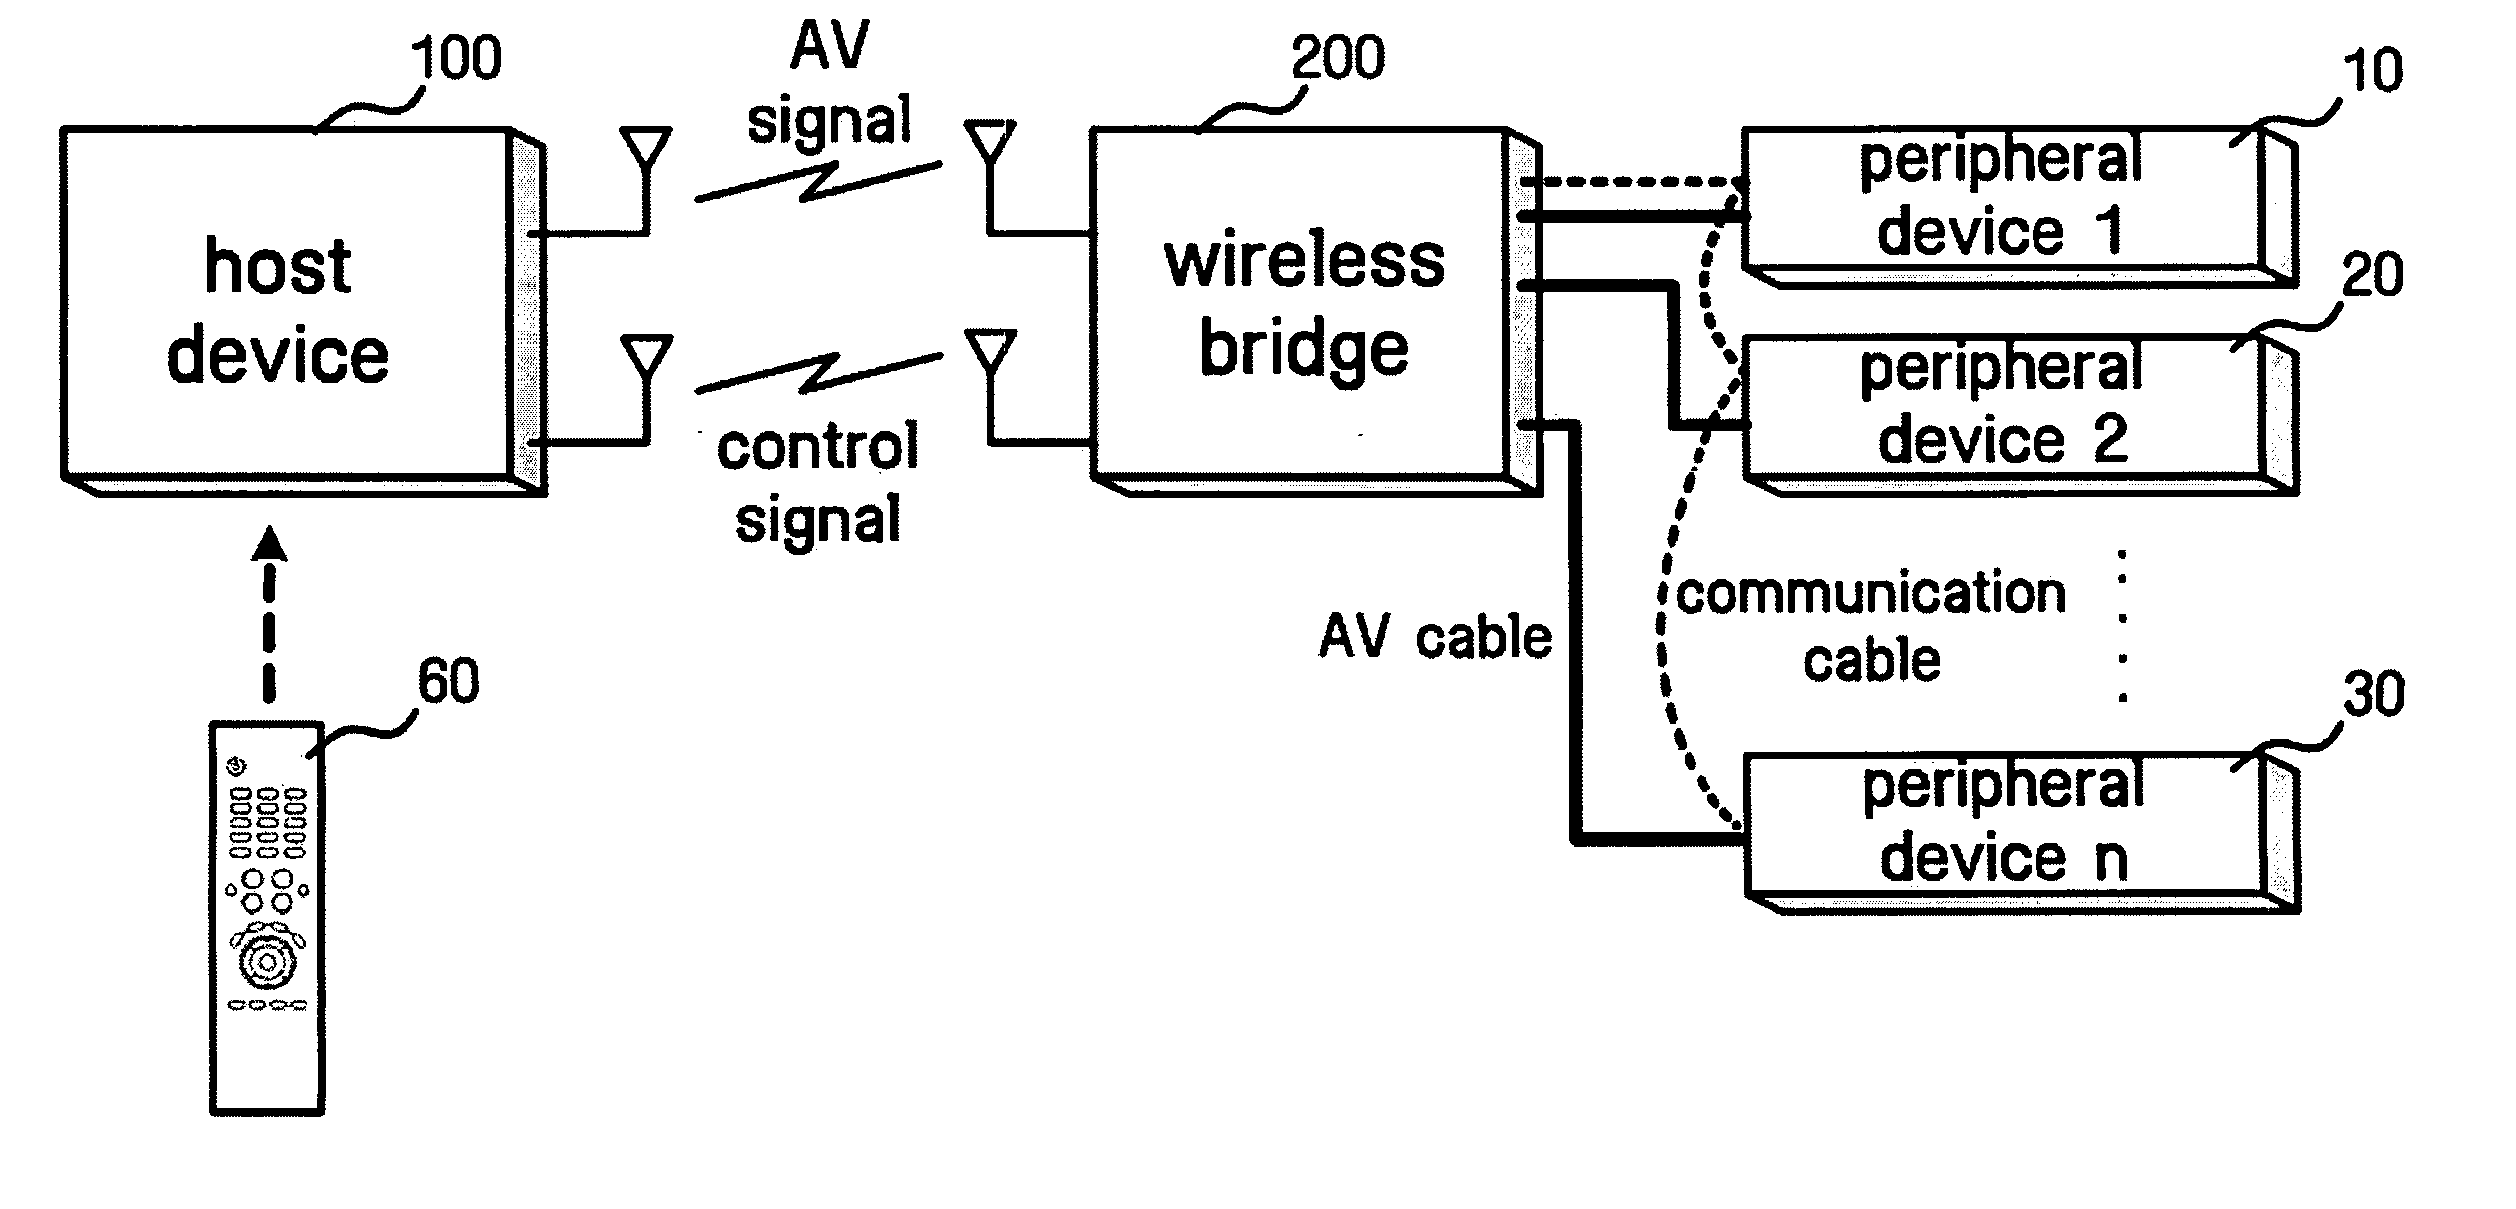 Method and apparatus for wirelessly controlling devices peripheral to AV device